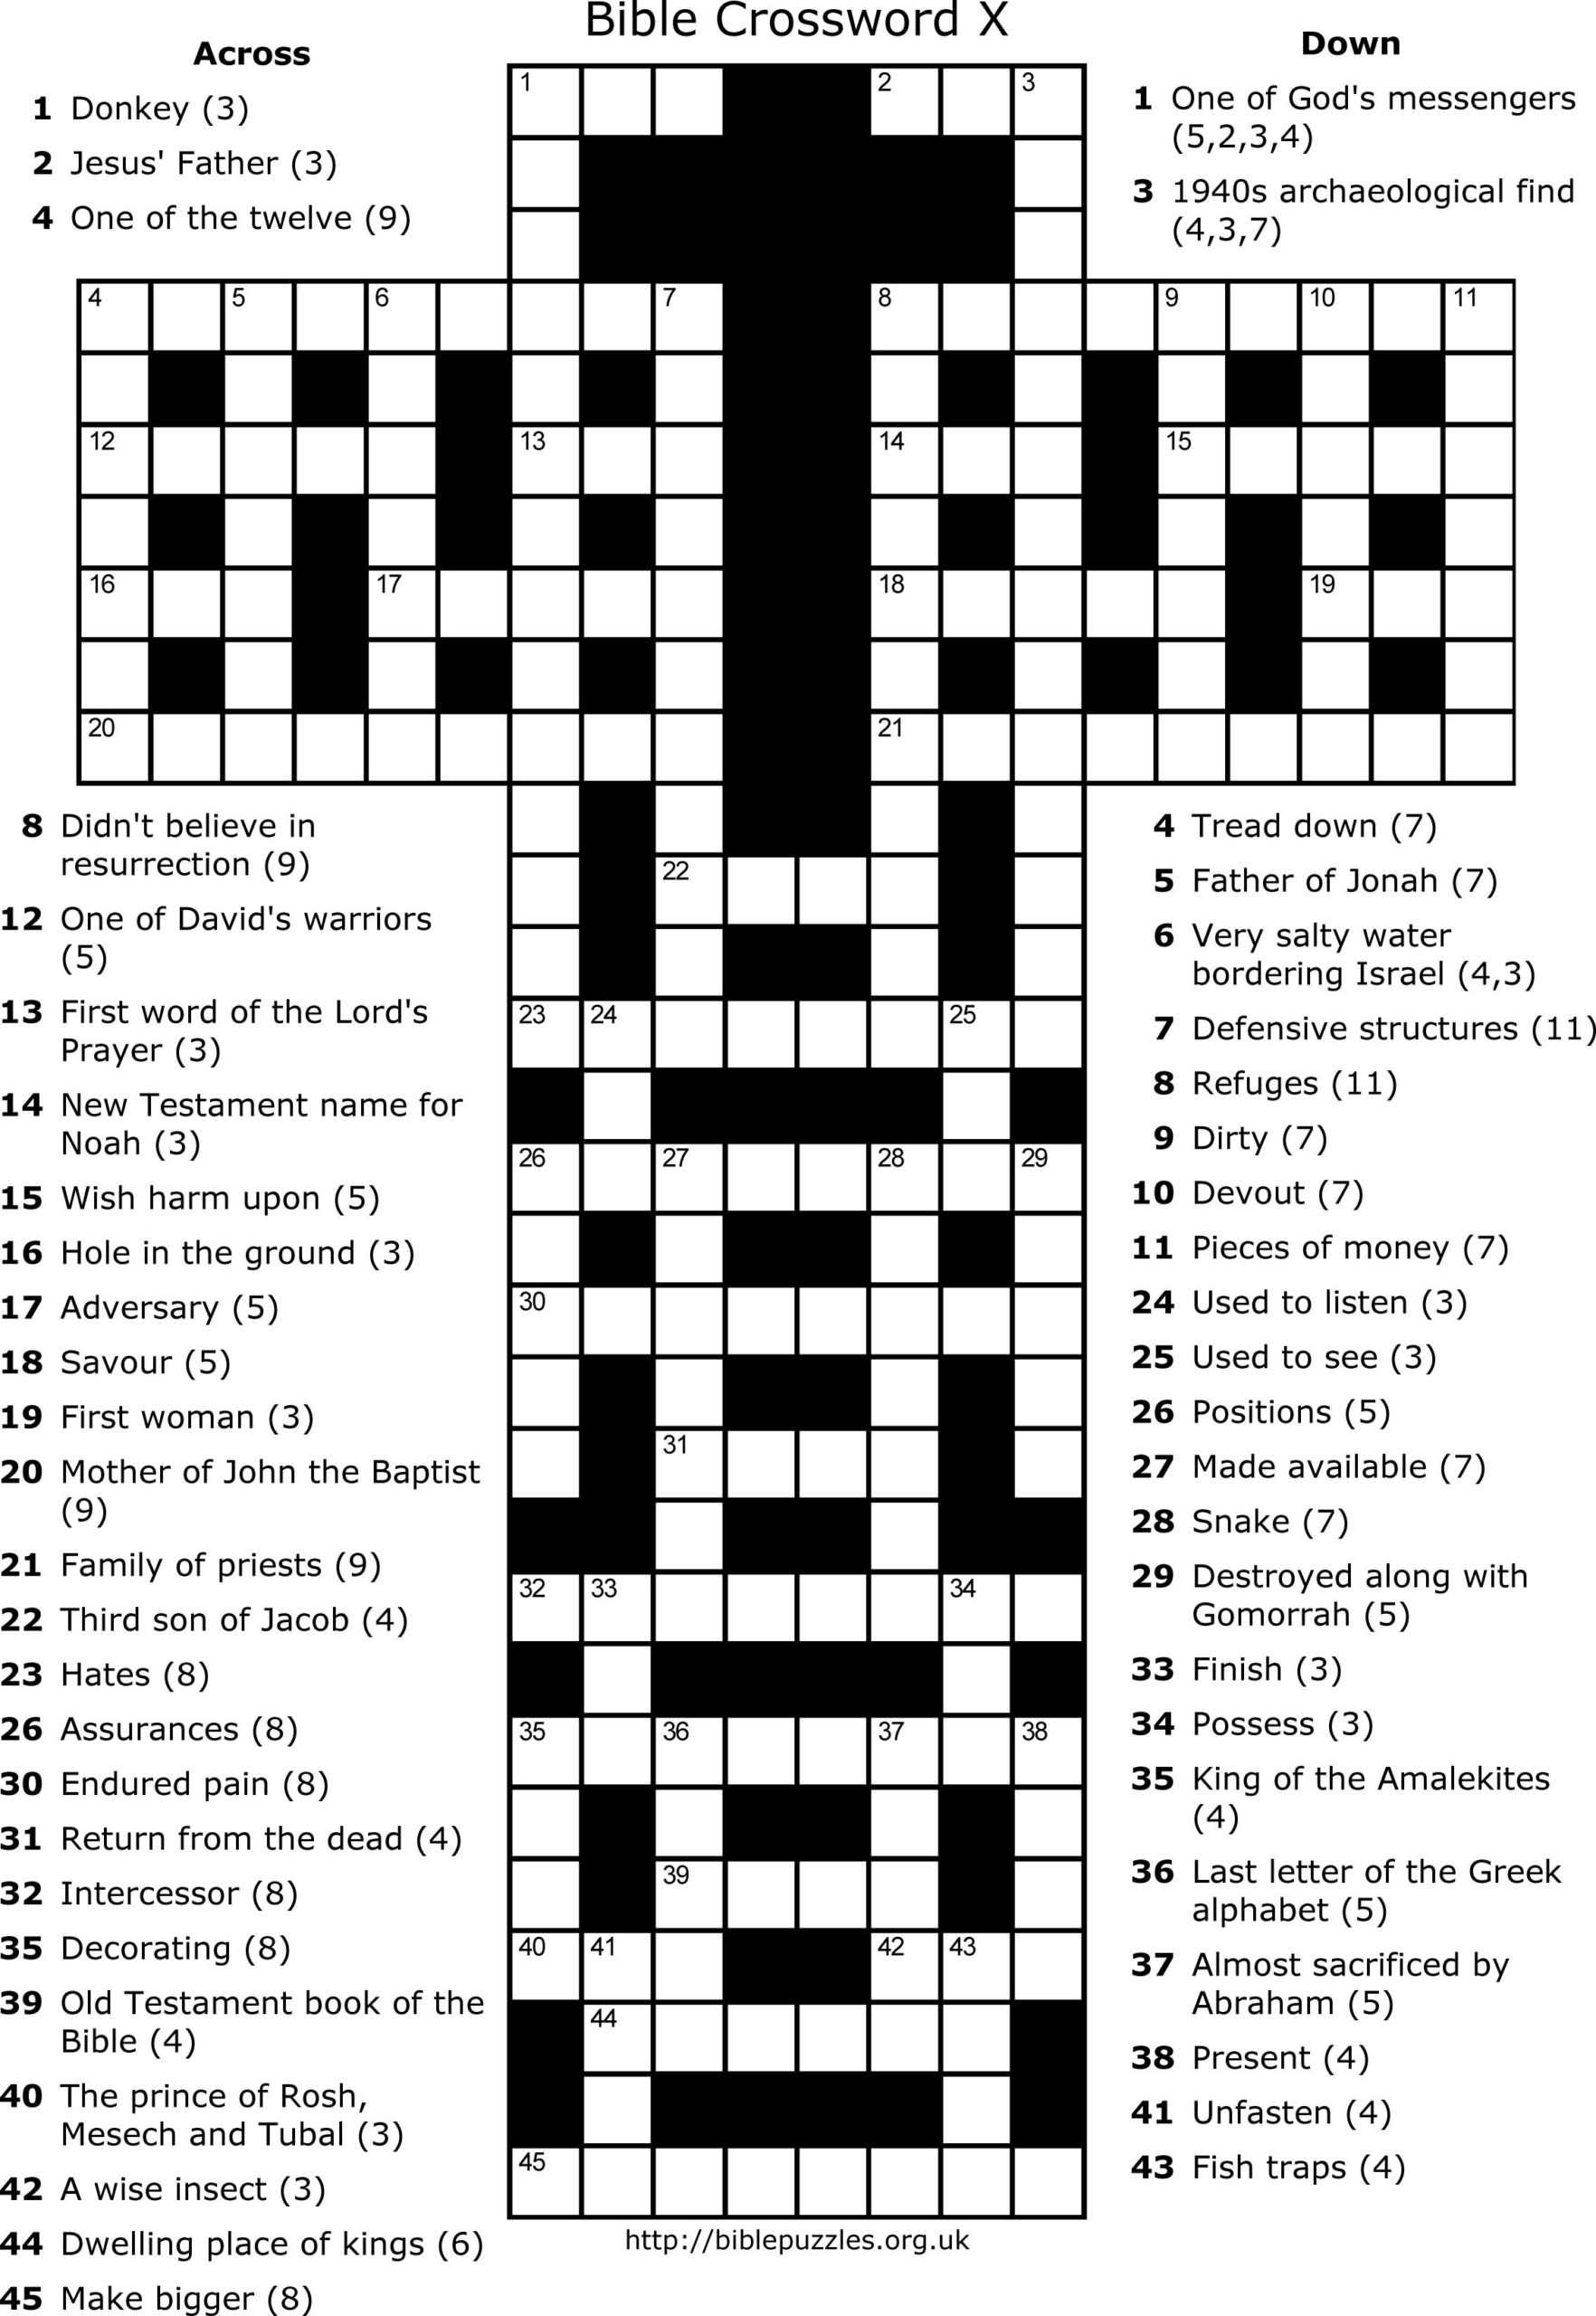 Bible Crossword Puzzles Printable With Answers Printable 